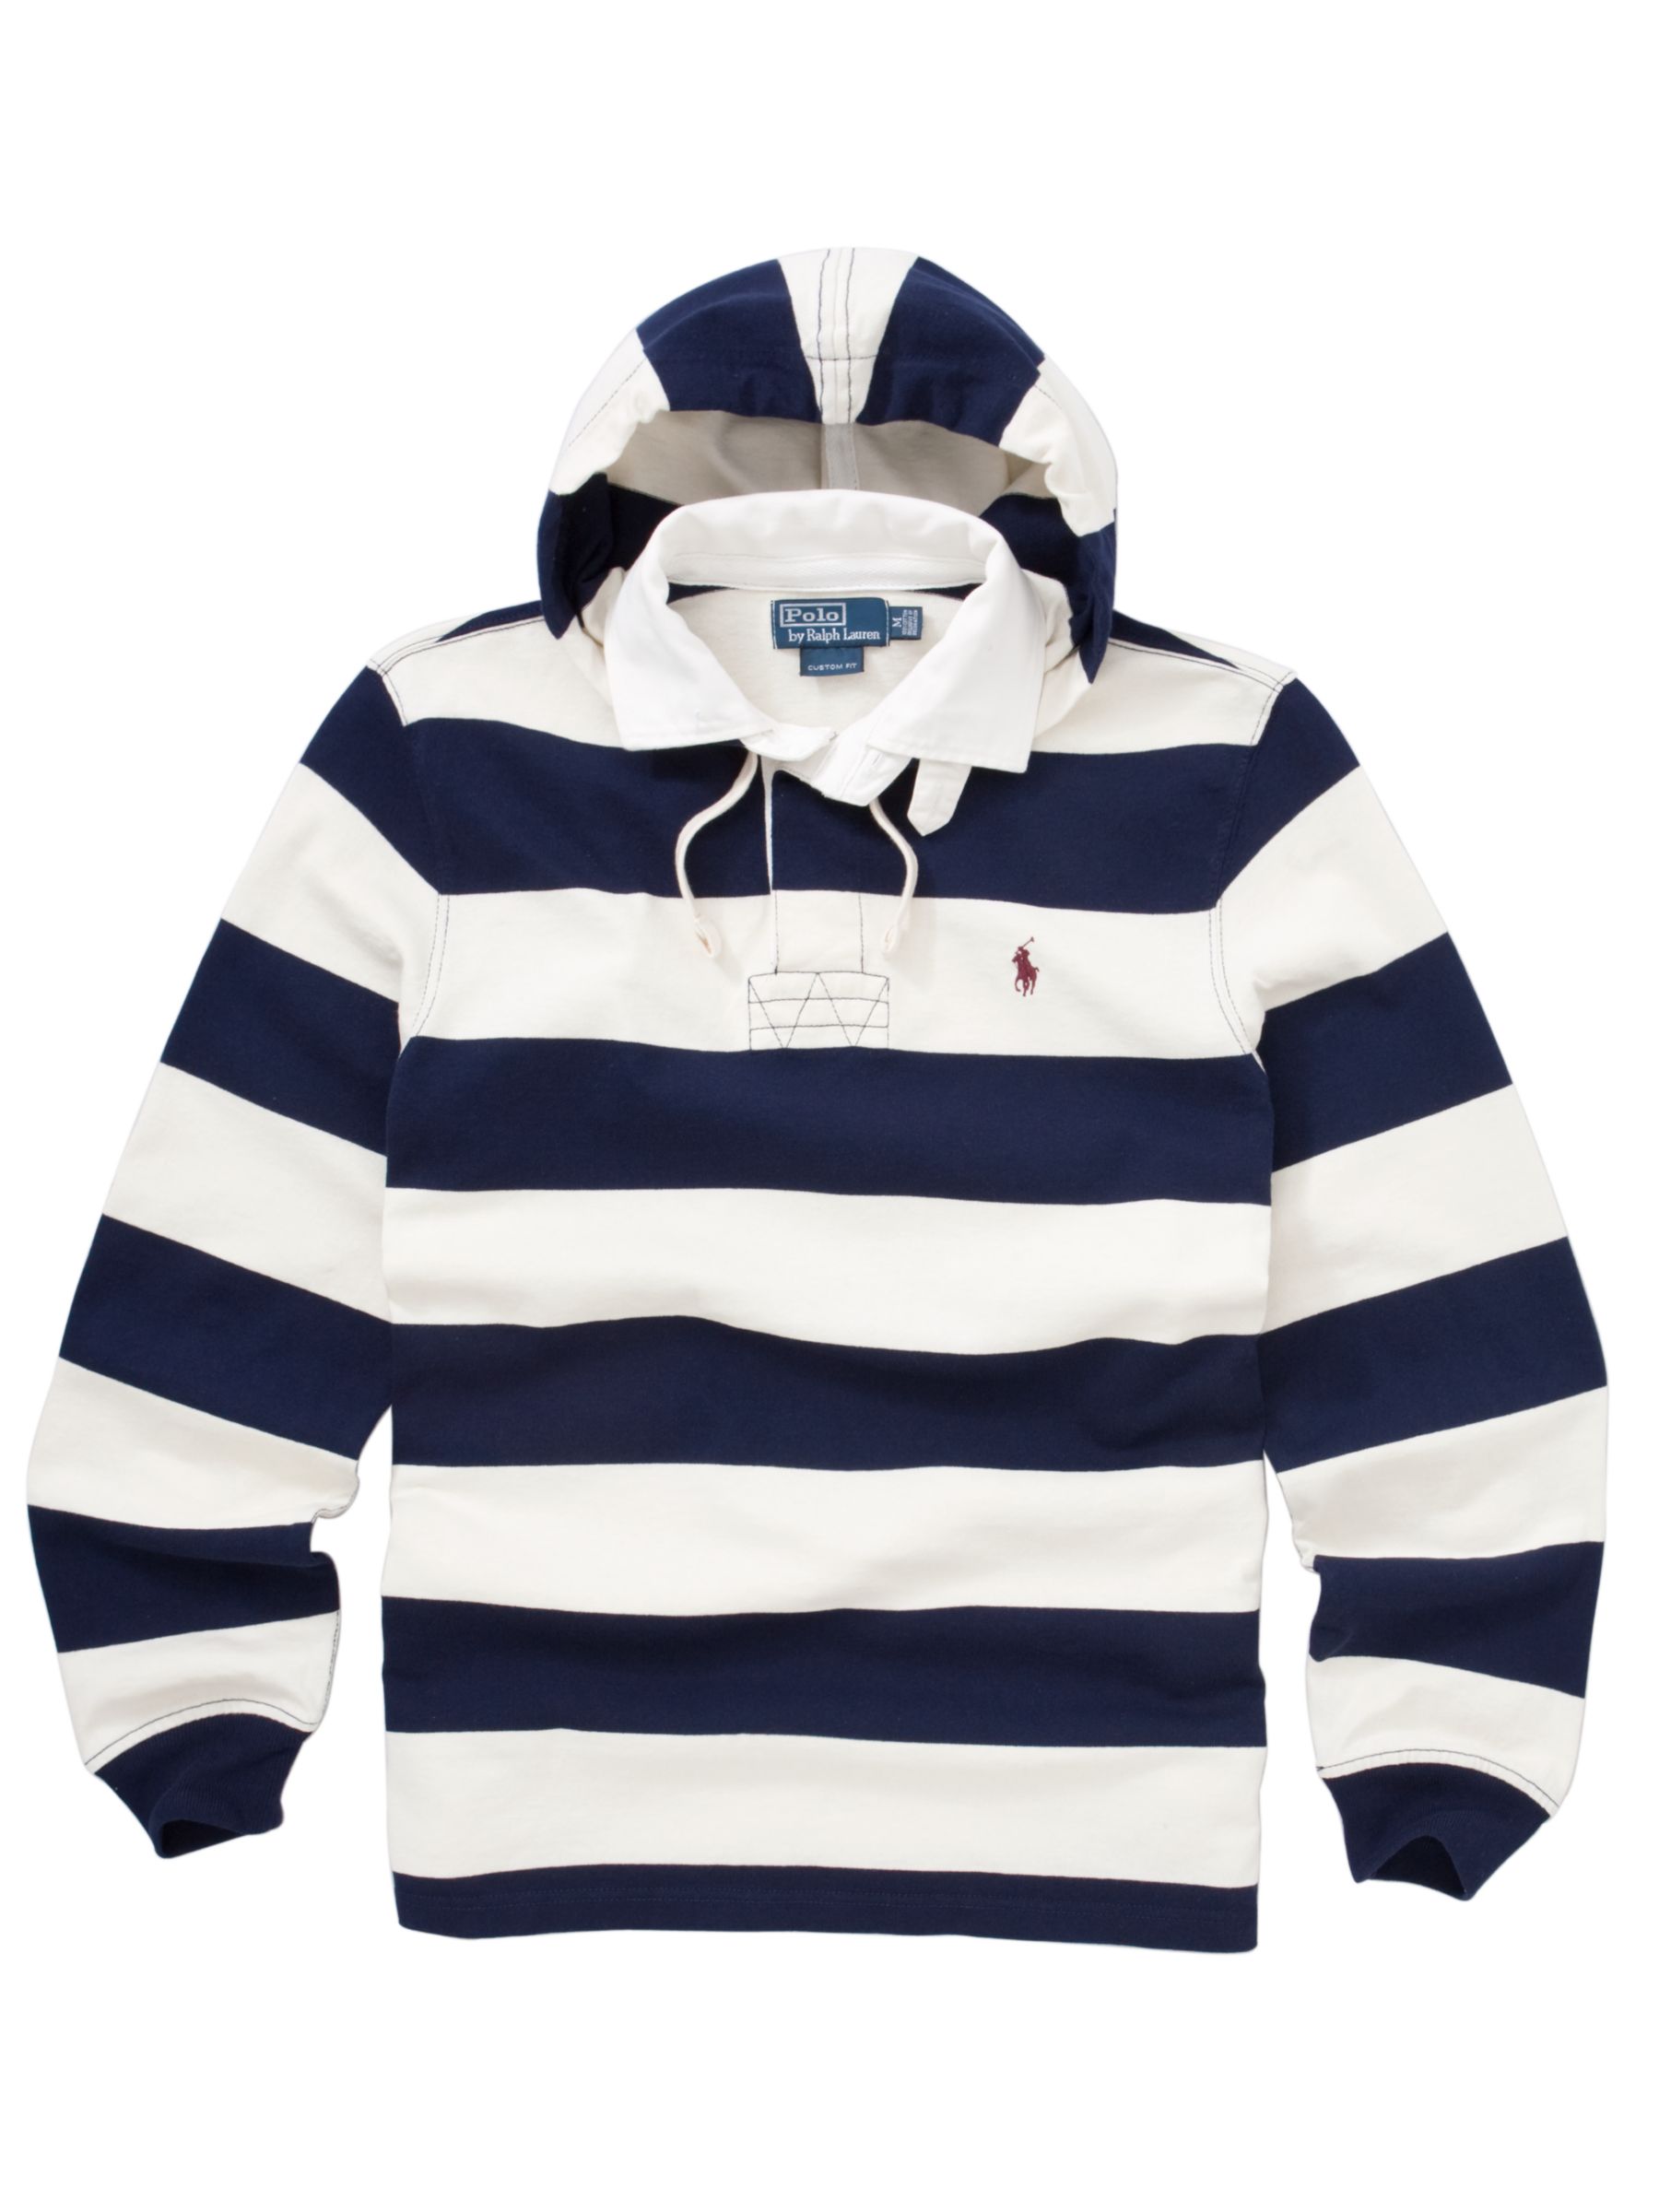 Polo Ralph Lauren Rugby Shirt Hoodie, White/navy